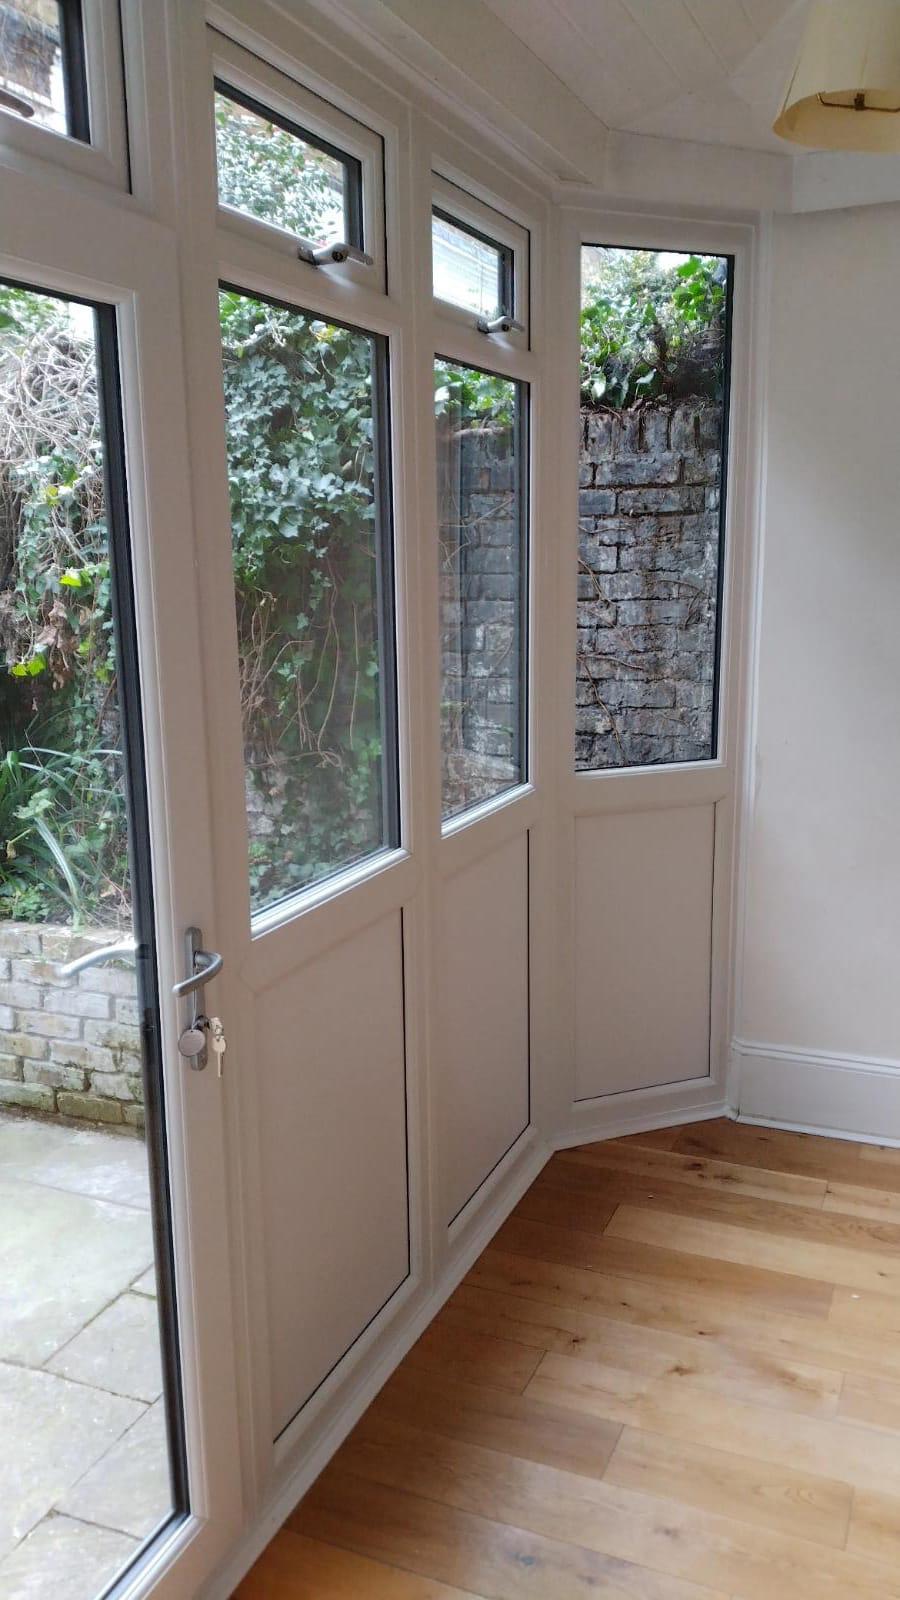 Gallery Photo French Doors